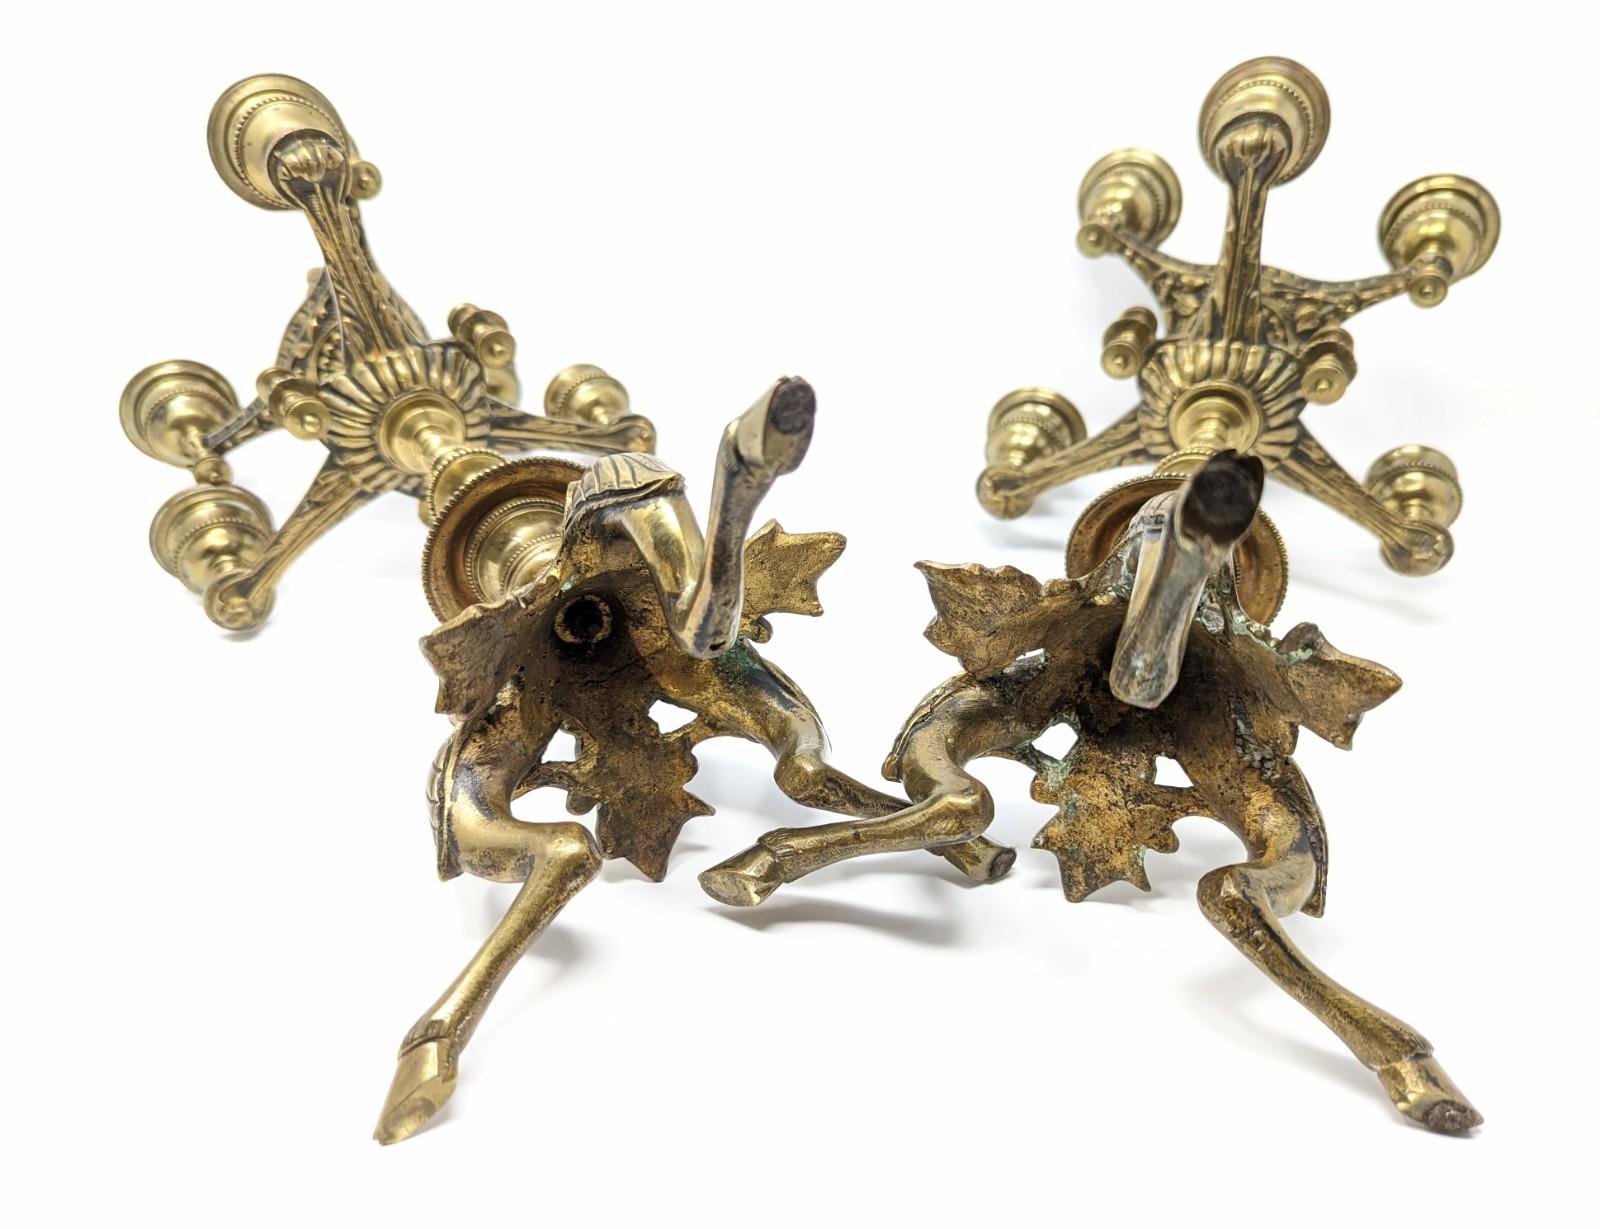 Pair of Antique Candelabras, 19th Century European Brass Candlesticks Footed For Sale 5